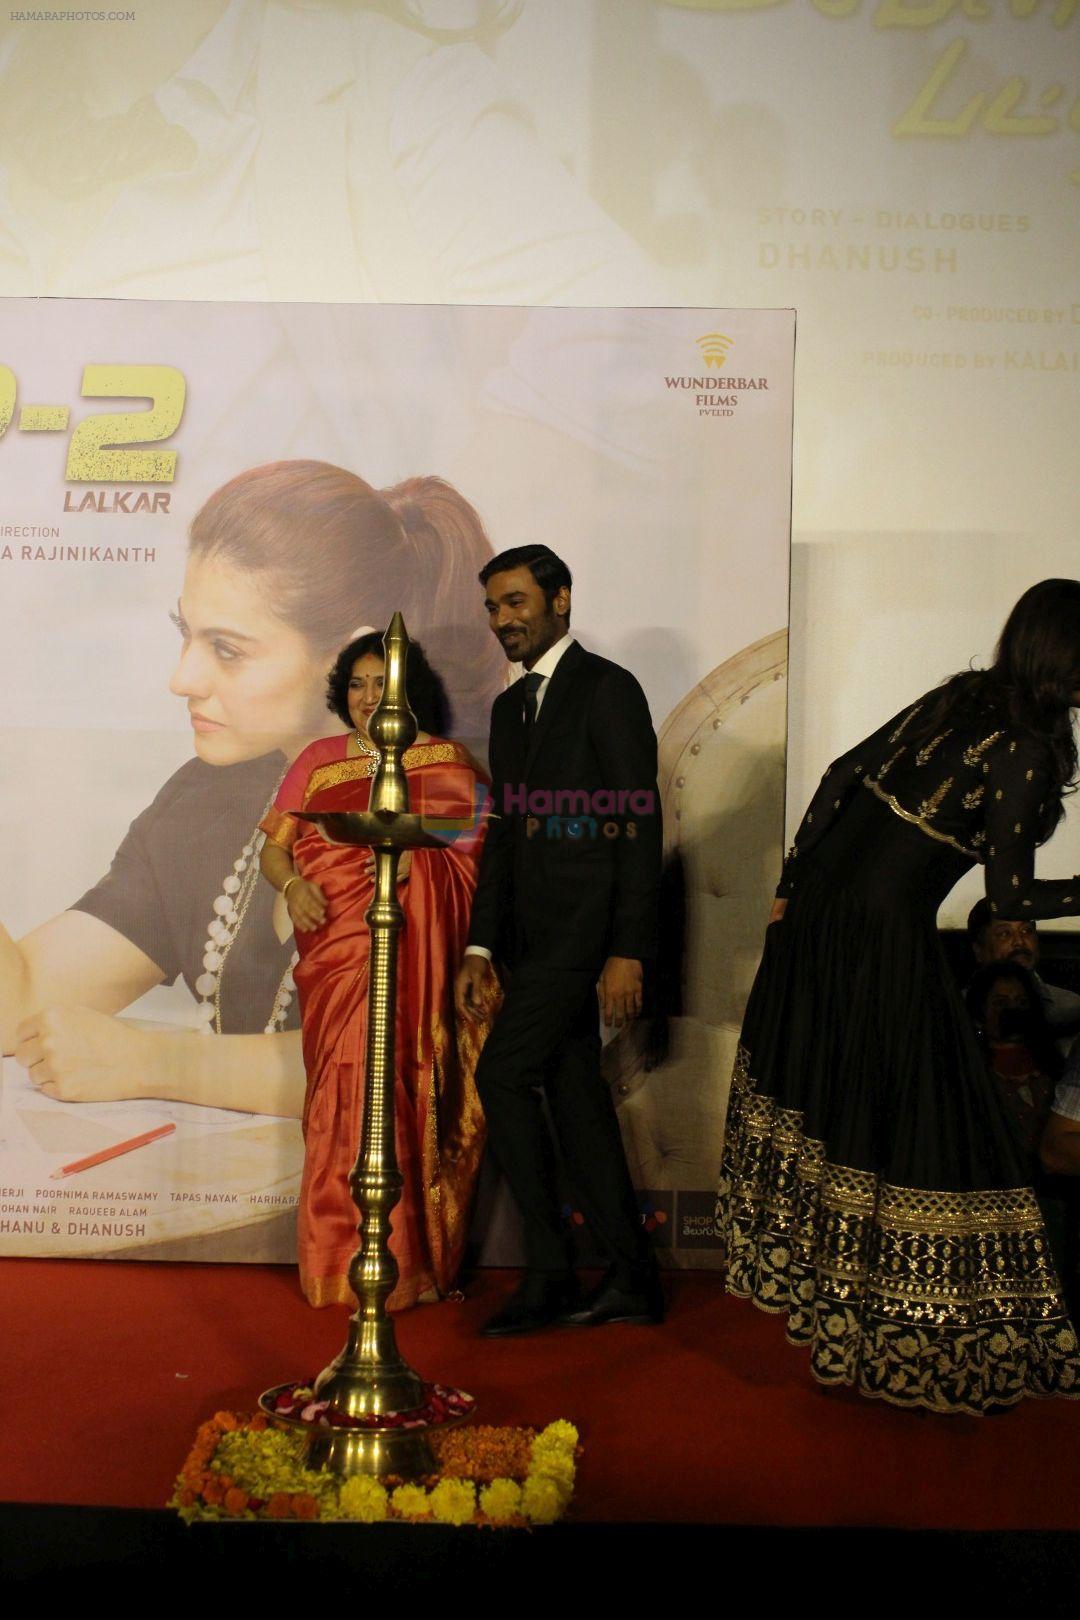 Dhanush at the trailer & music launch of VIP 2 on 25th June 2017